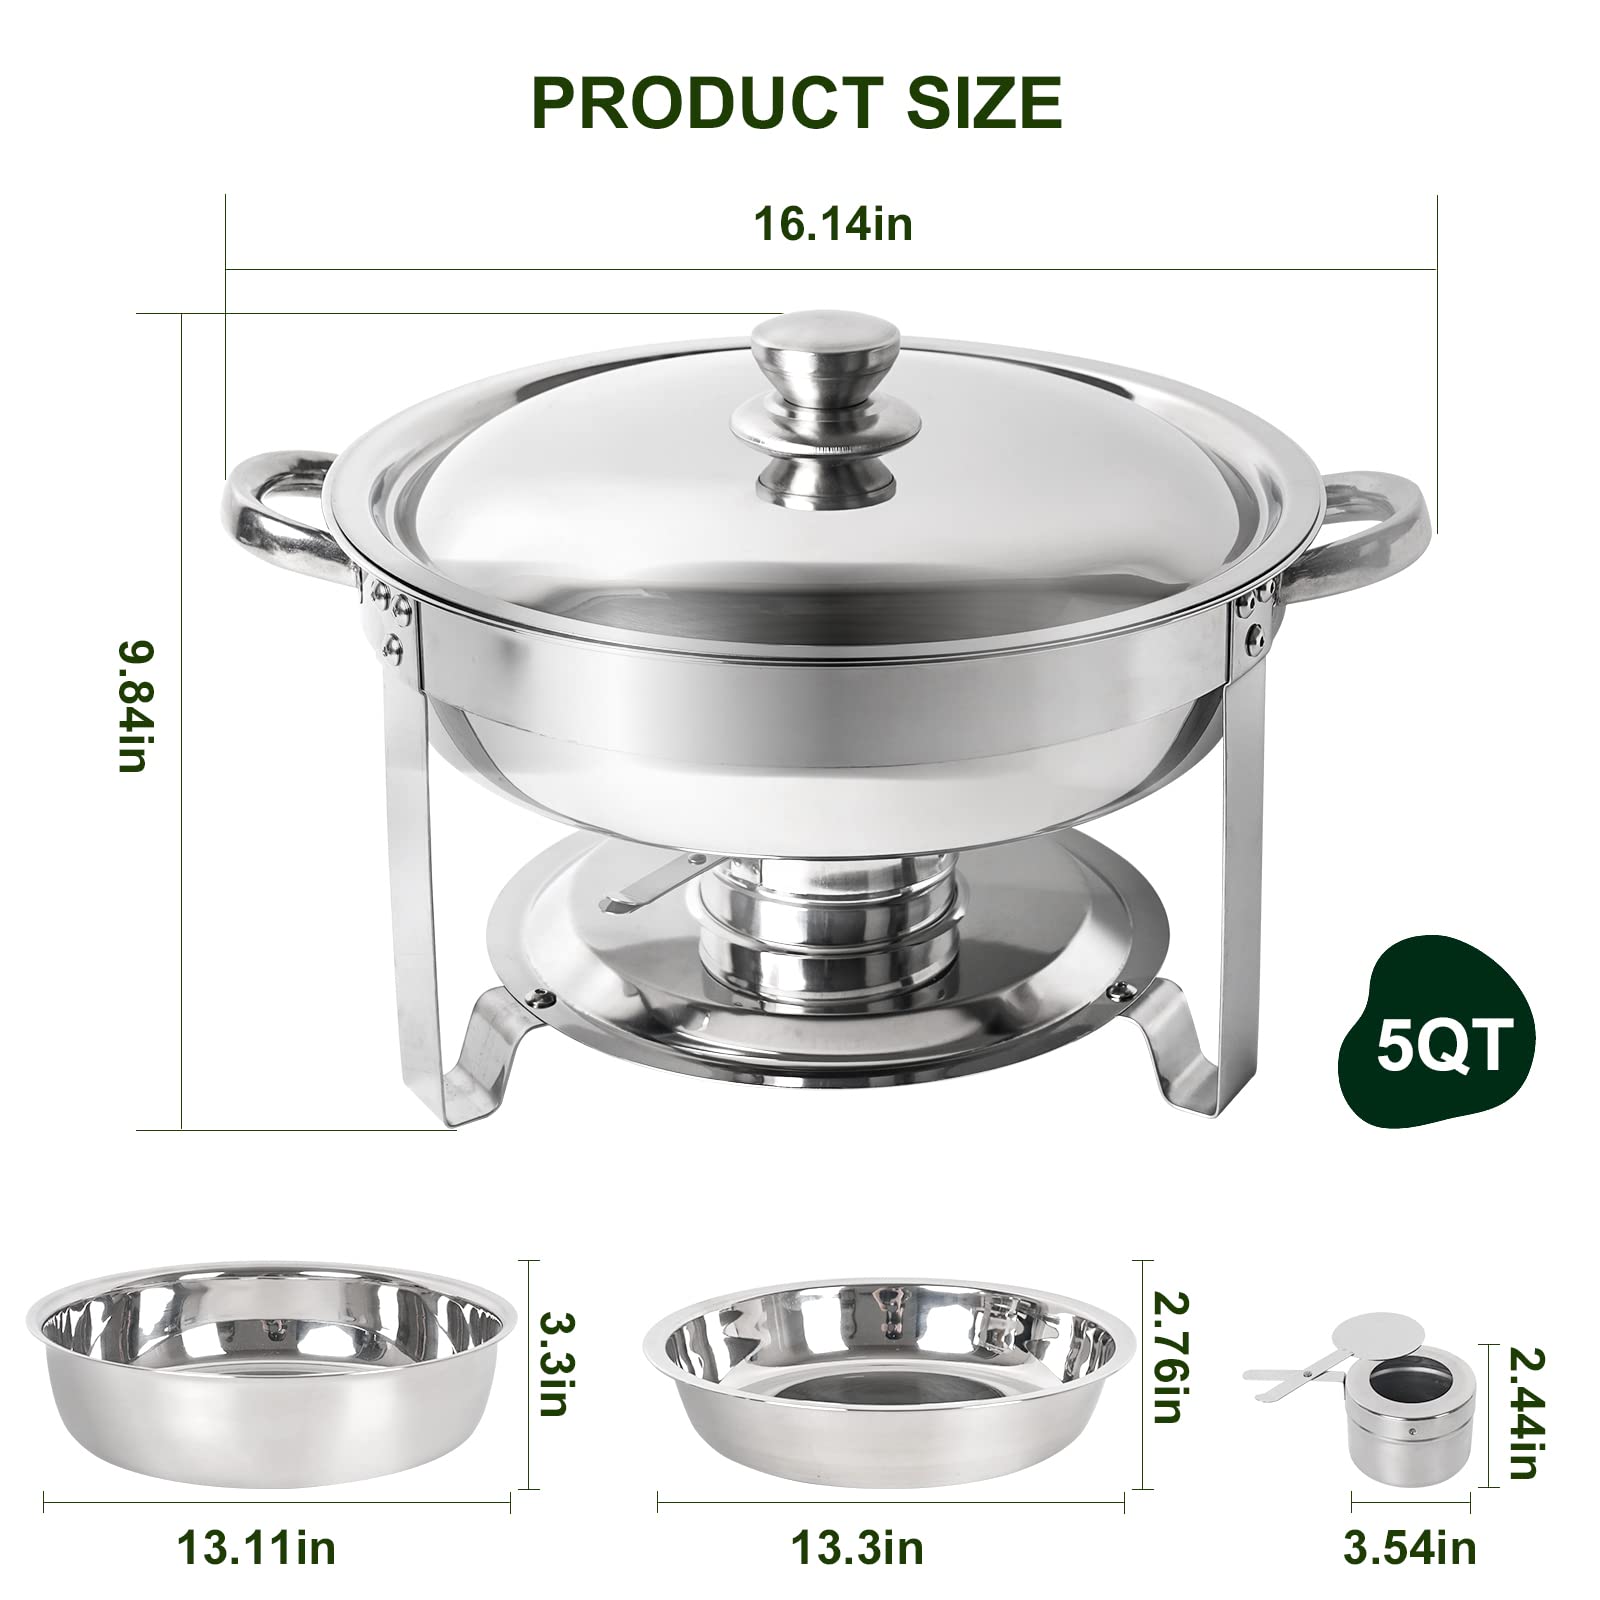 IMACONE Chafing Dish Buffet Set of 2 Pack, 5QT Round Stainless Steel Chafer for Catering, Upgraded Chafers and Buffet Warmer Sets with Food & Water Pan, Lid, Frame, Fuel Holder for Event Party Holiday